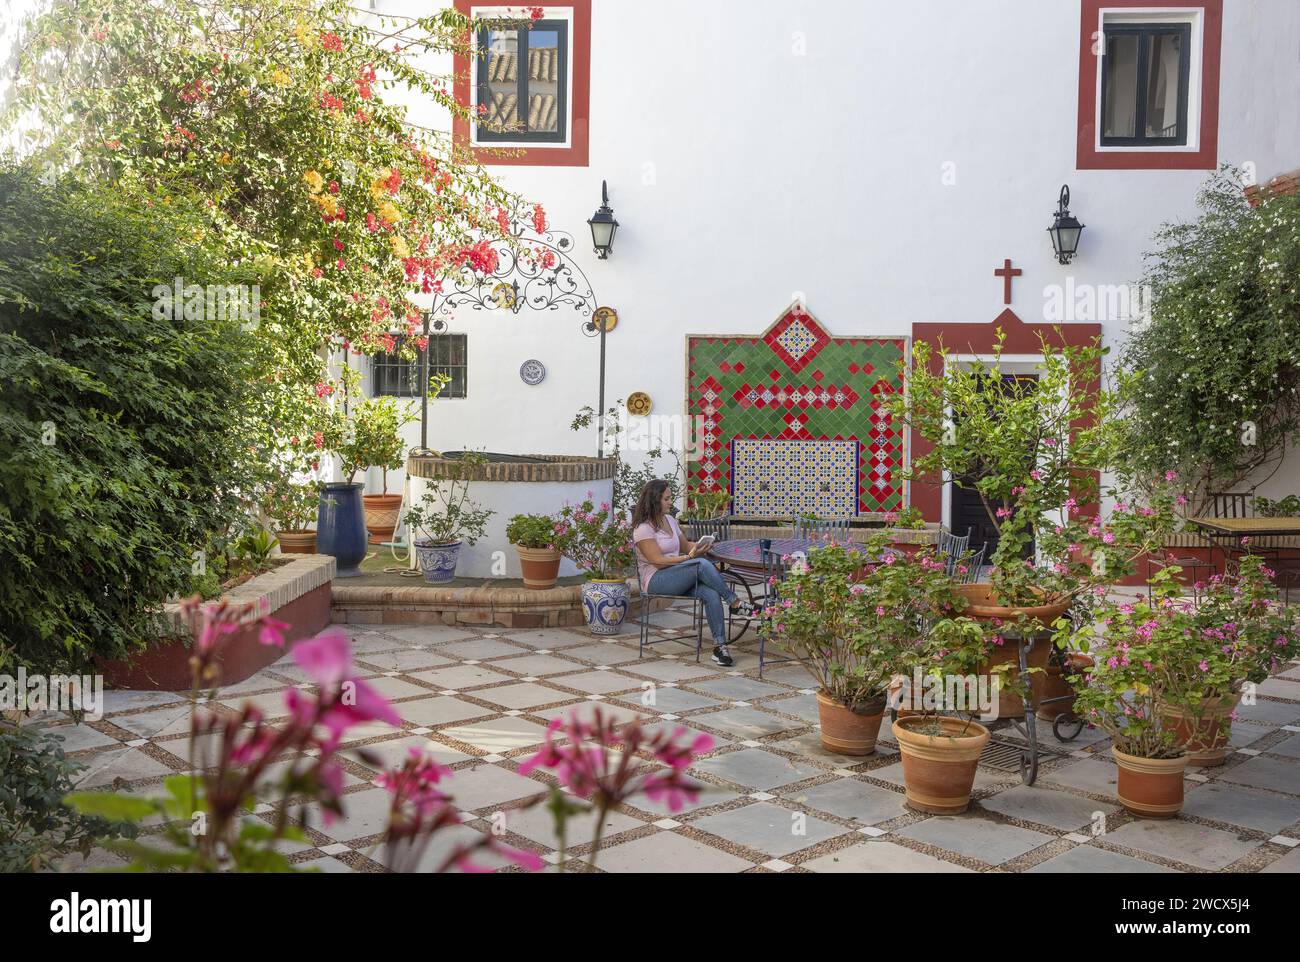 Spain, Andalusia, Moron de la Frontera, hacienda las Alcabalas, woman reading at a zellige table in the flowered patio decorated with azulejos of an Andalusian Sevillian-style hacienda Stock Photo